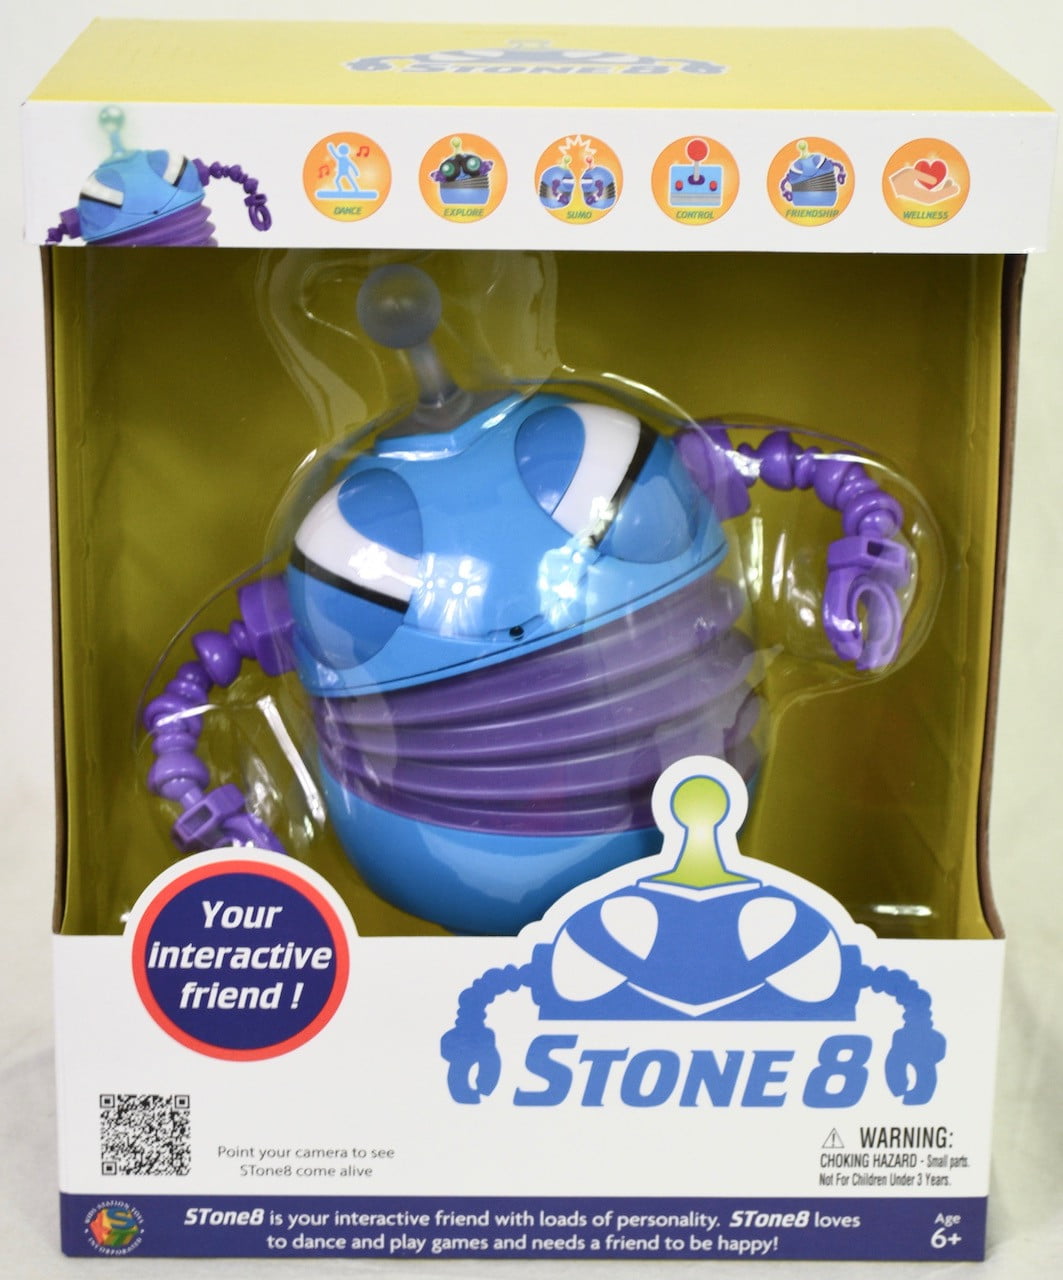 Blue Kid's Interactive Toy Robot Play Games Works with App New Stone 8 Robot 